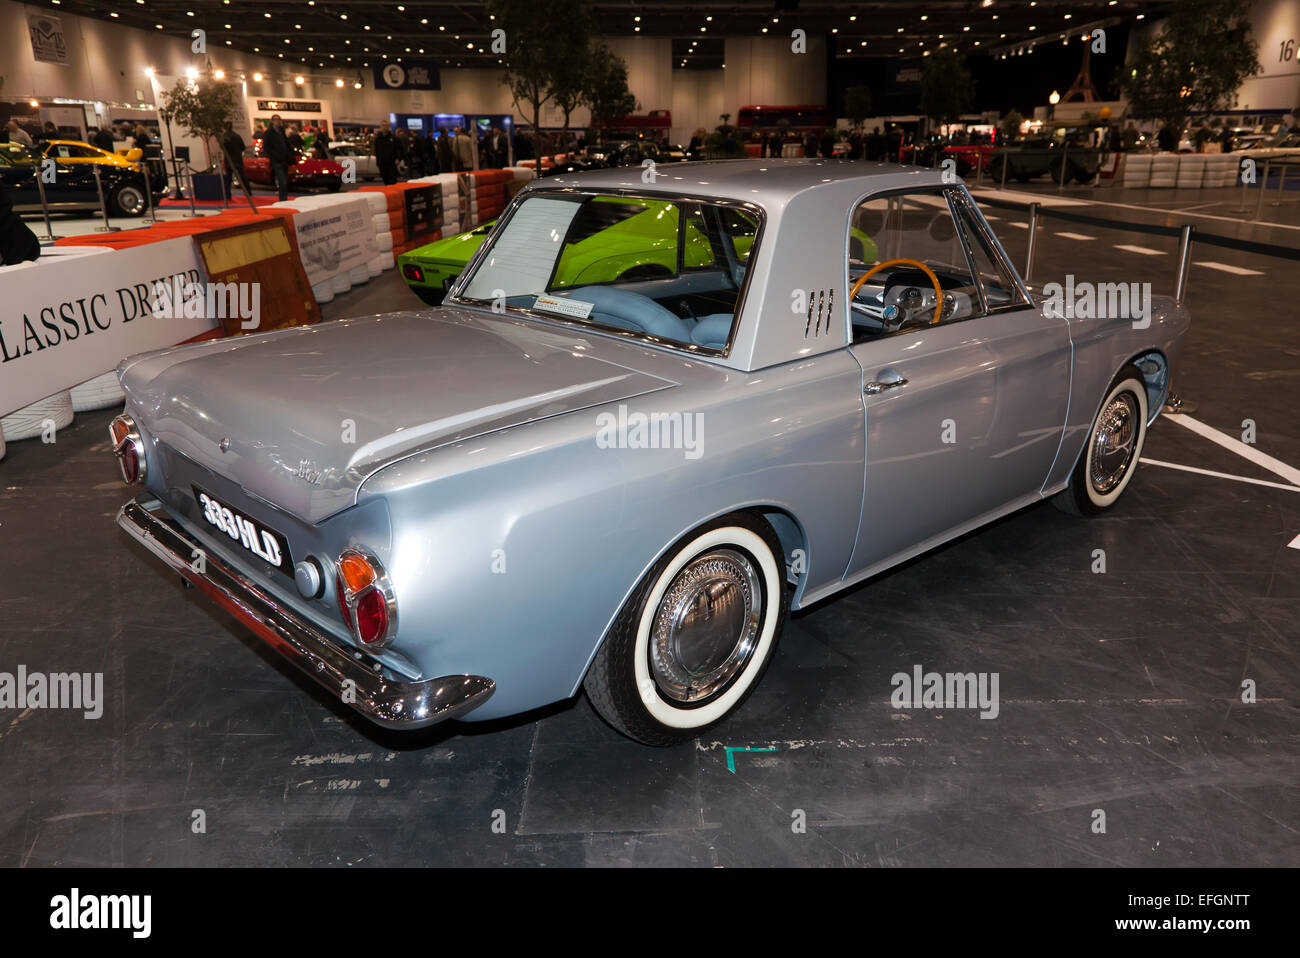 Replica of a Ford Saxon Cortina, a one-off concept car, on display at the London Classic Car Show. Stock Photo